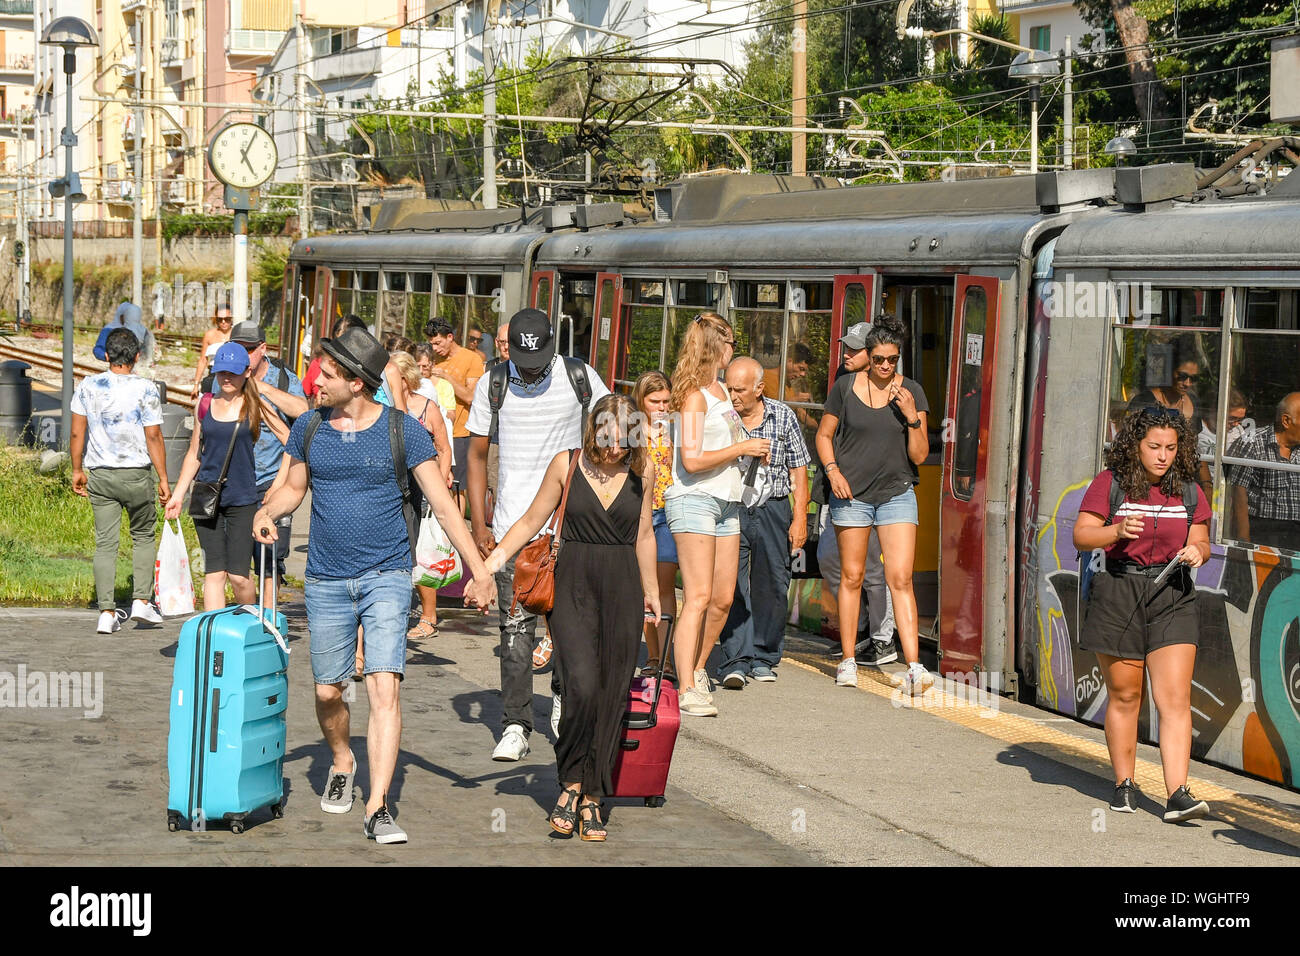 SORRENTO, ITALY - AUGUST 2019: People getting off a train after arriving at Sorrento railway station. Stock Photo